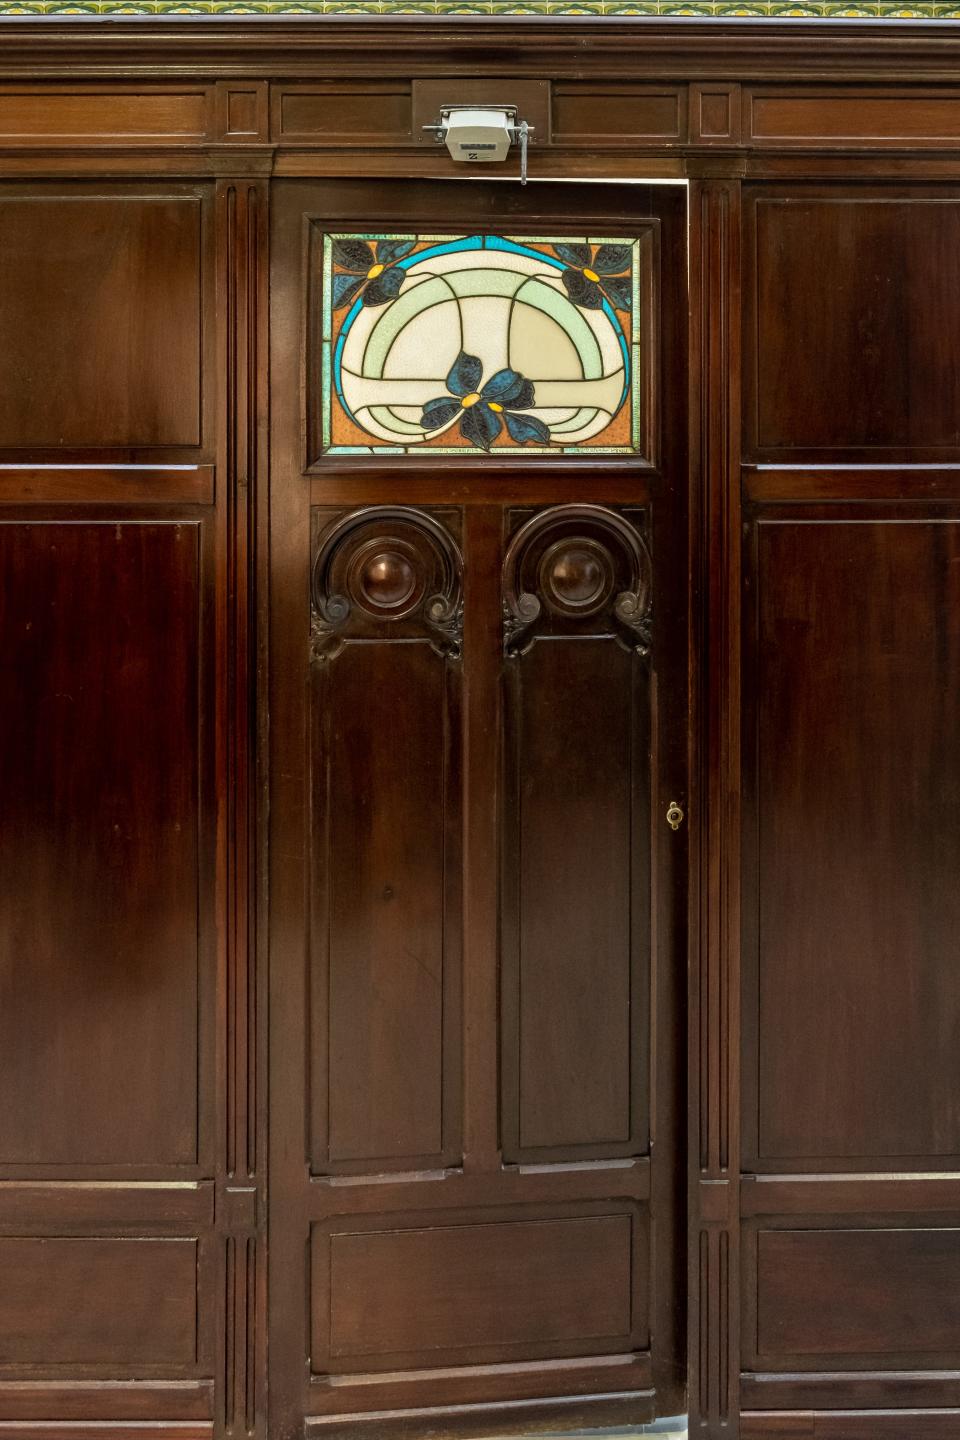 A mahogany door featuring a stained glass window in green, blue, and orange hues